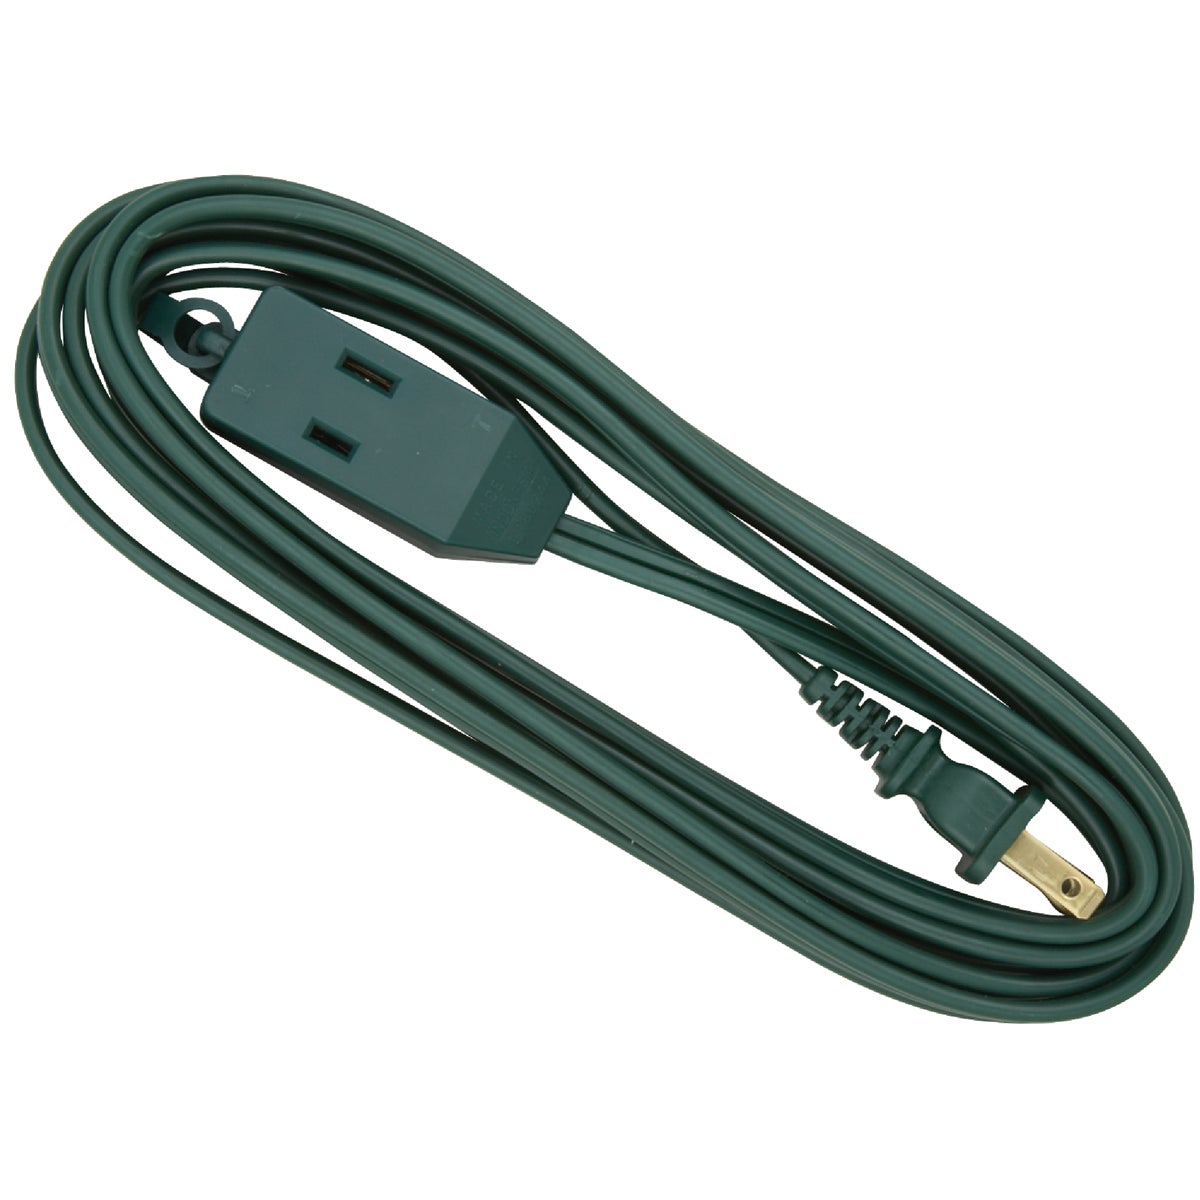 Do it 12 Ft. 16/2 Green Cube Tap Extension Cord